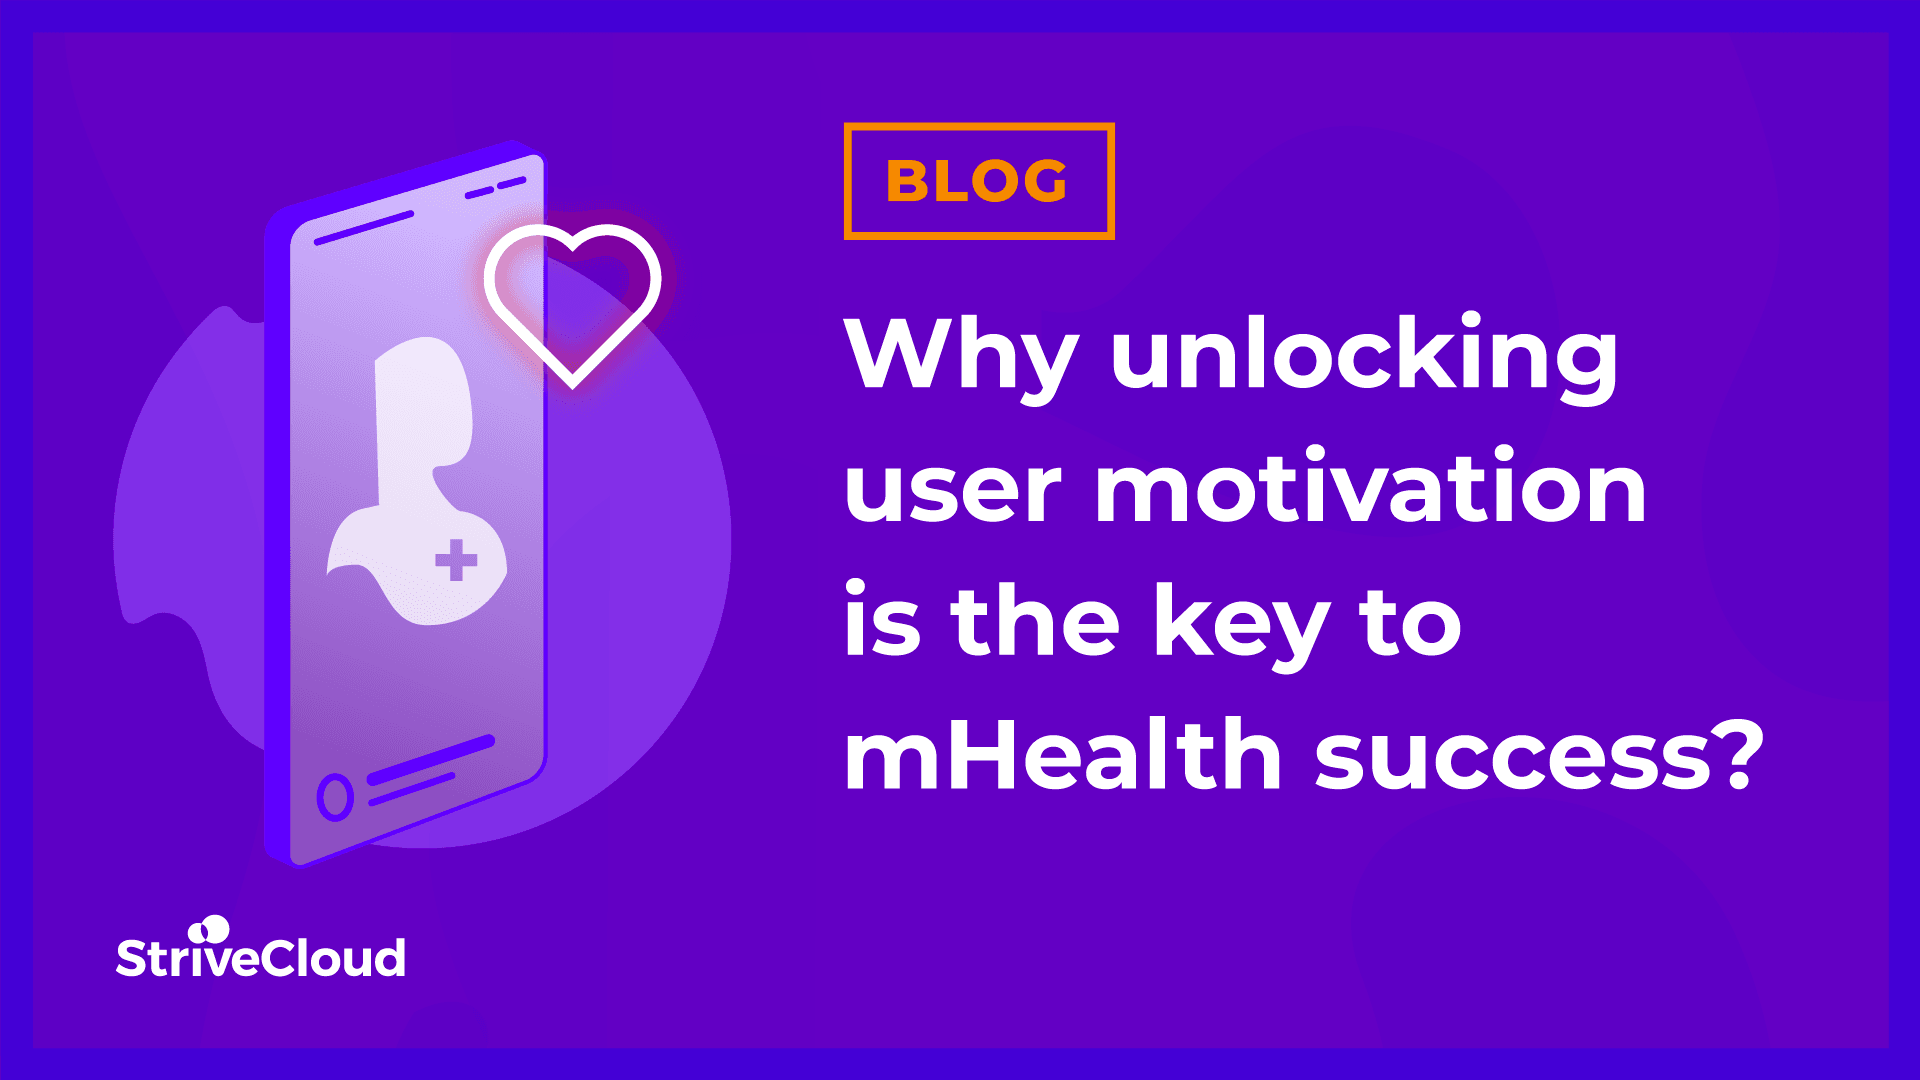 Why unlocking user motivation is the key to mHealth success?